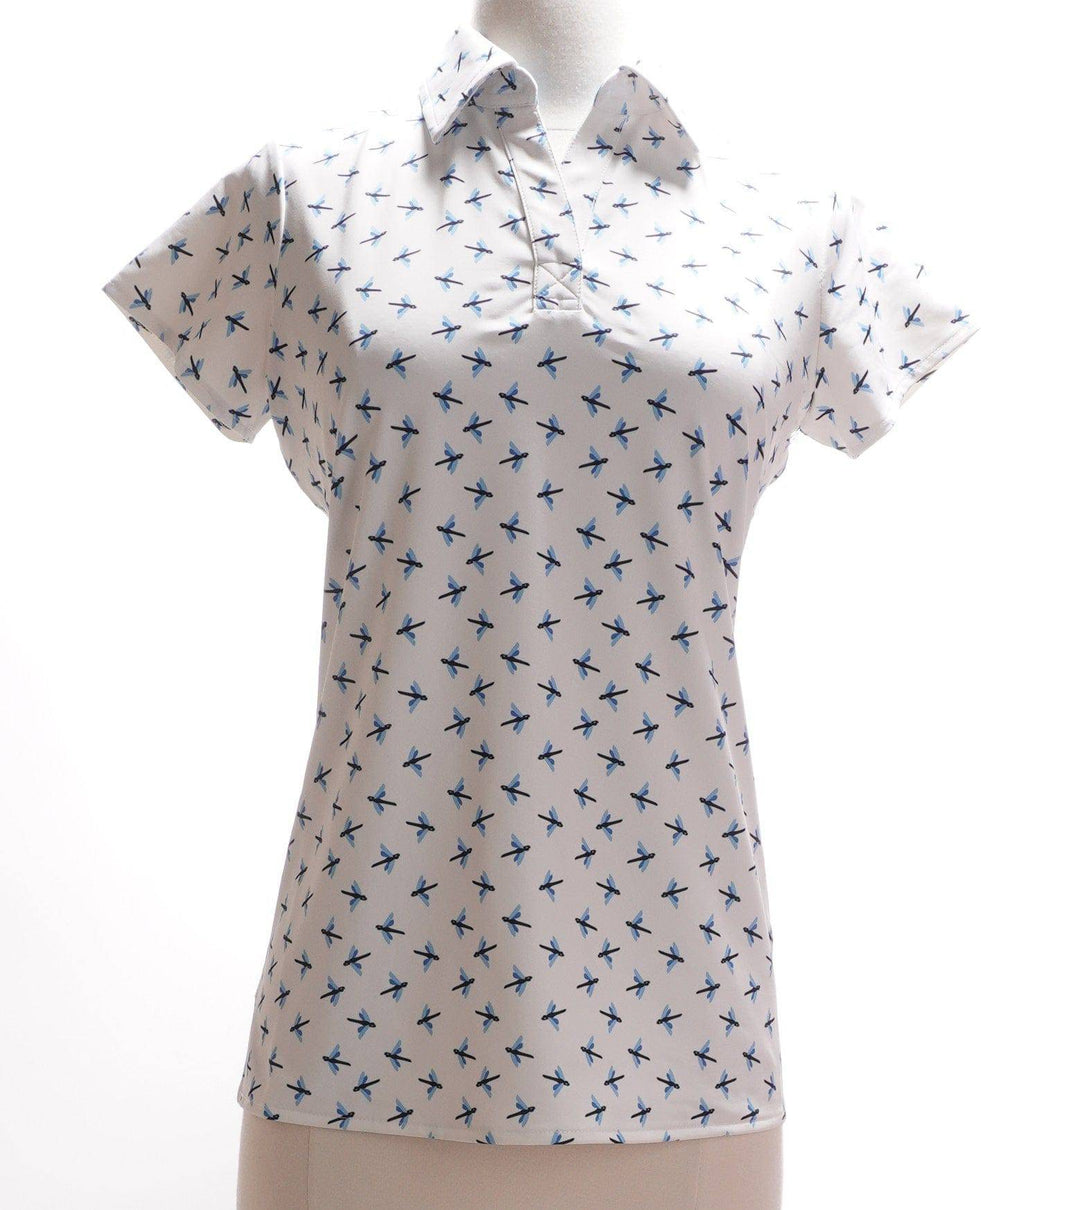 Belyn Key White / Small / Consigned Belyn Key Short Sleeve Top - White - Size Small